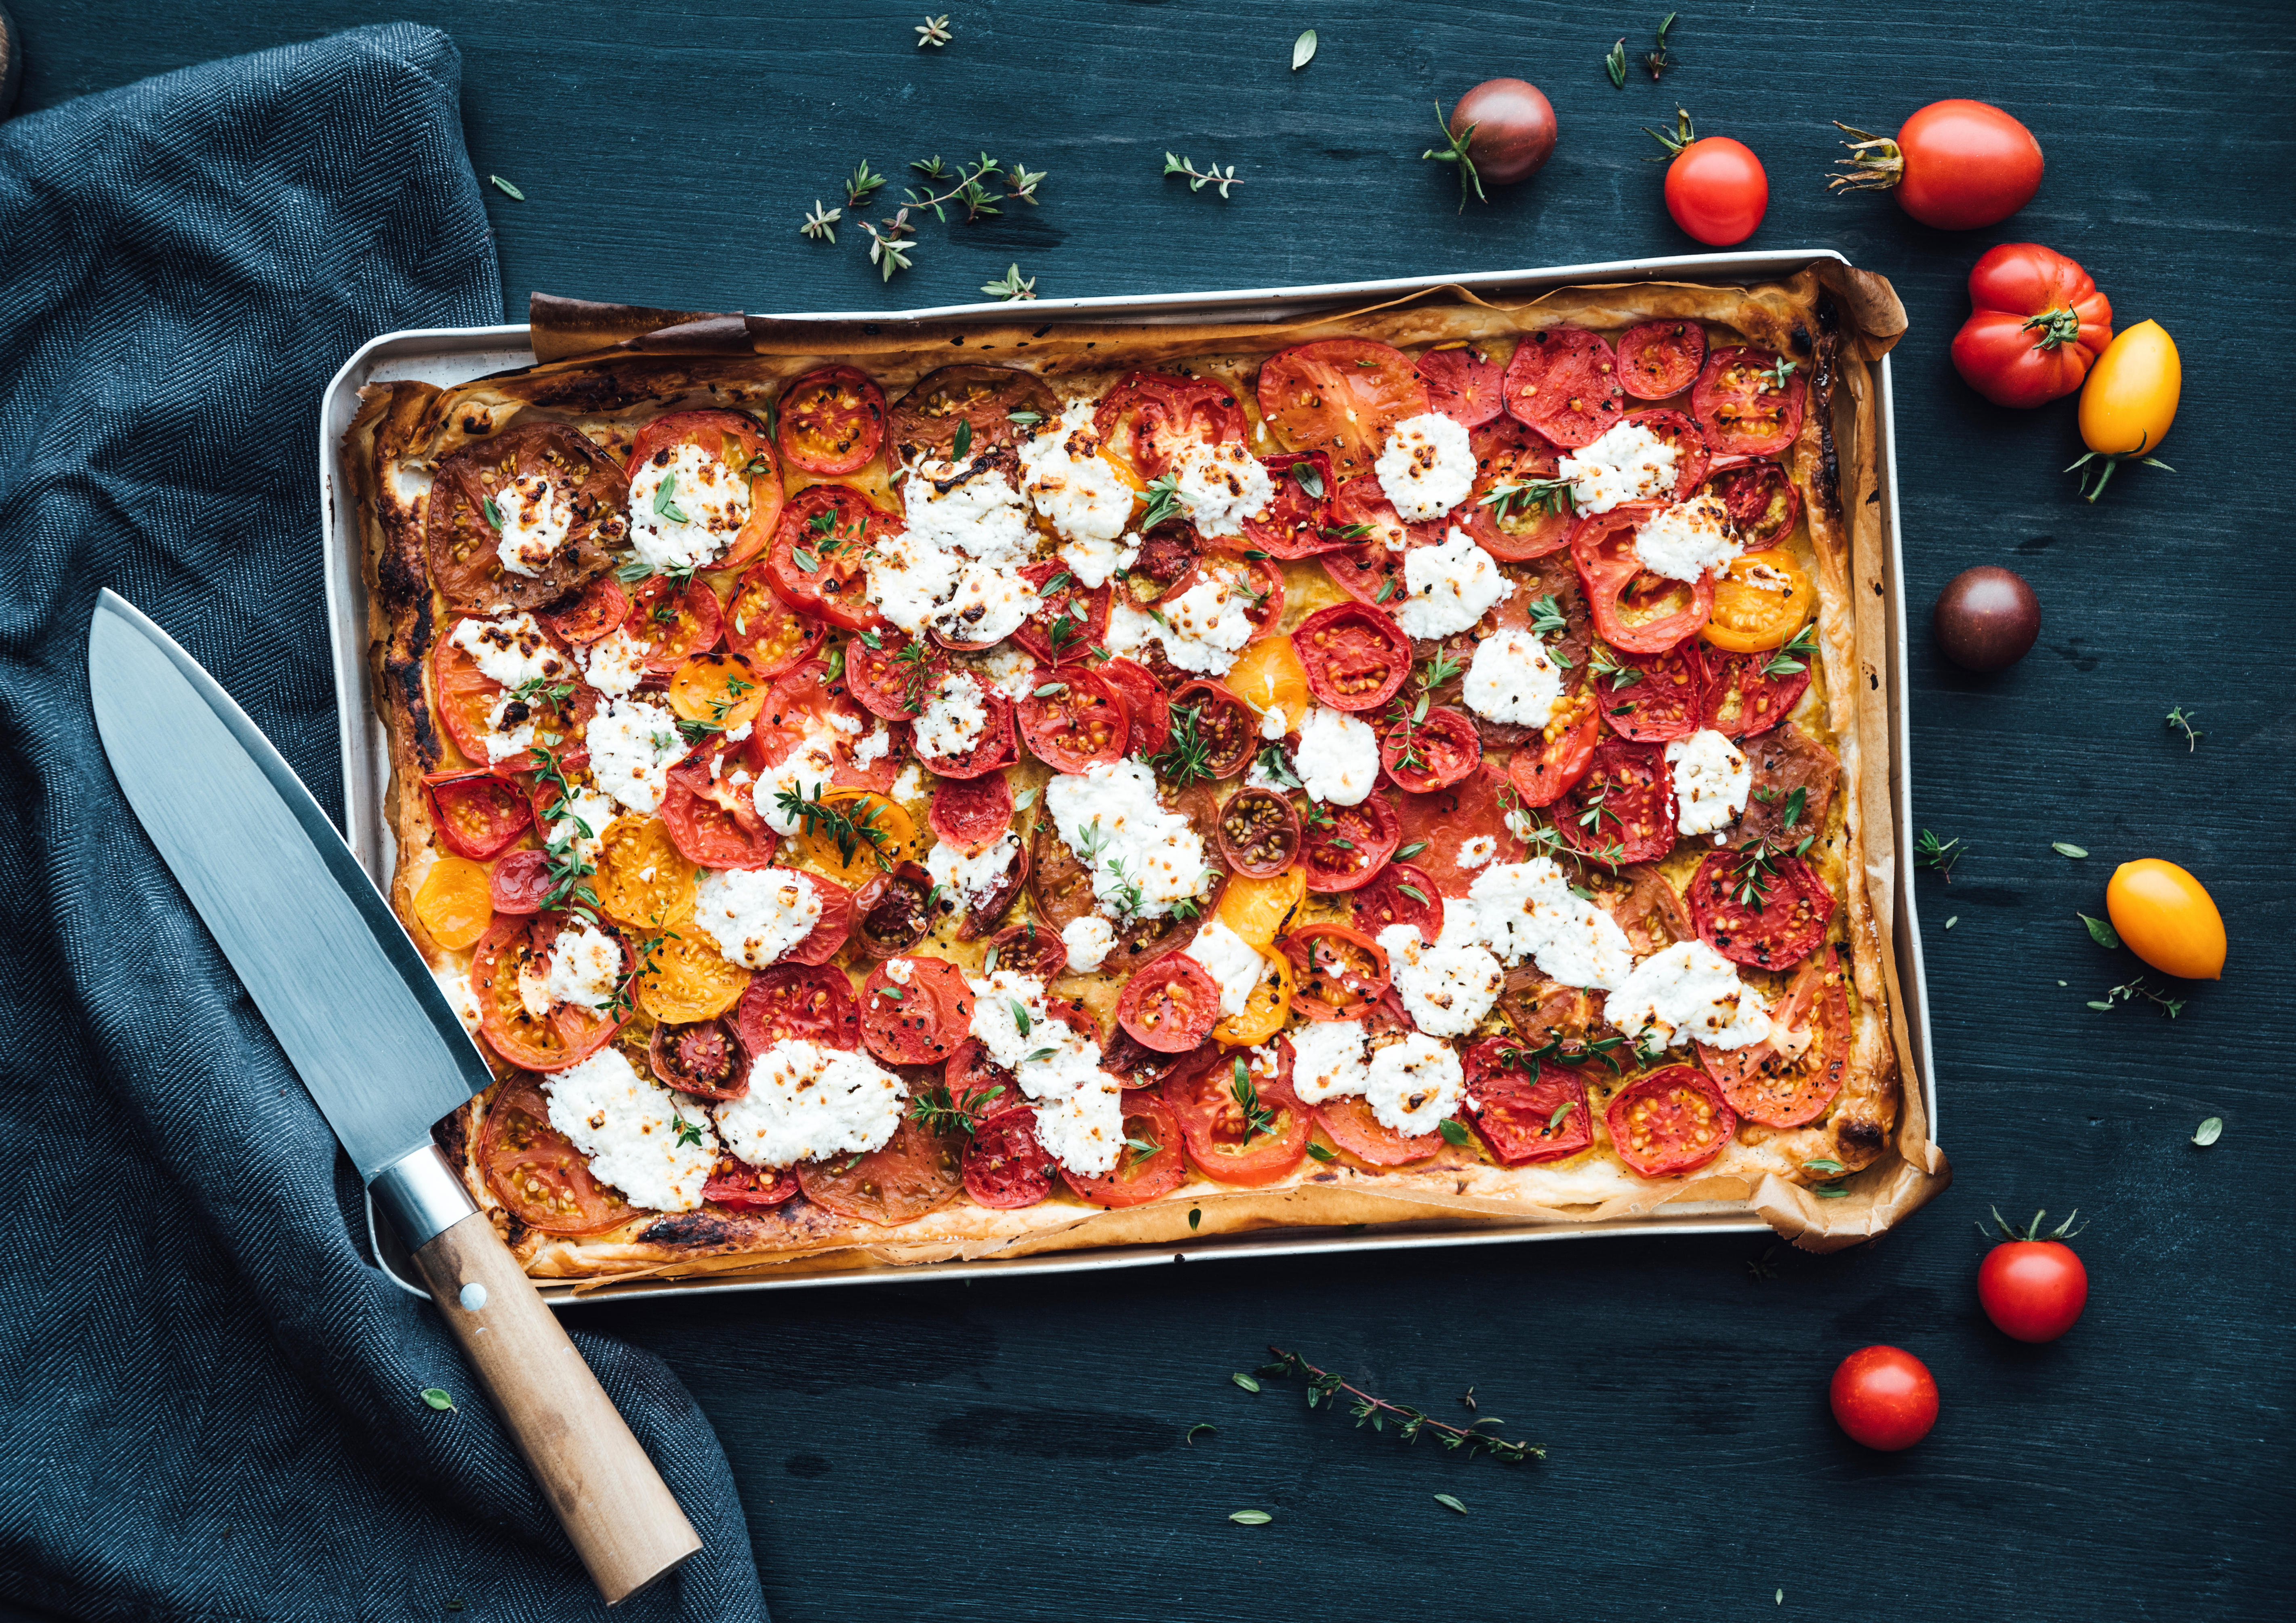 Tomato tart with goat cheese and thyme on mustard